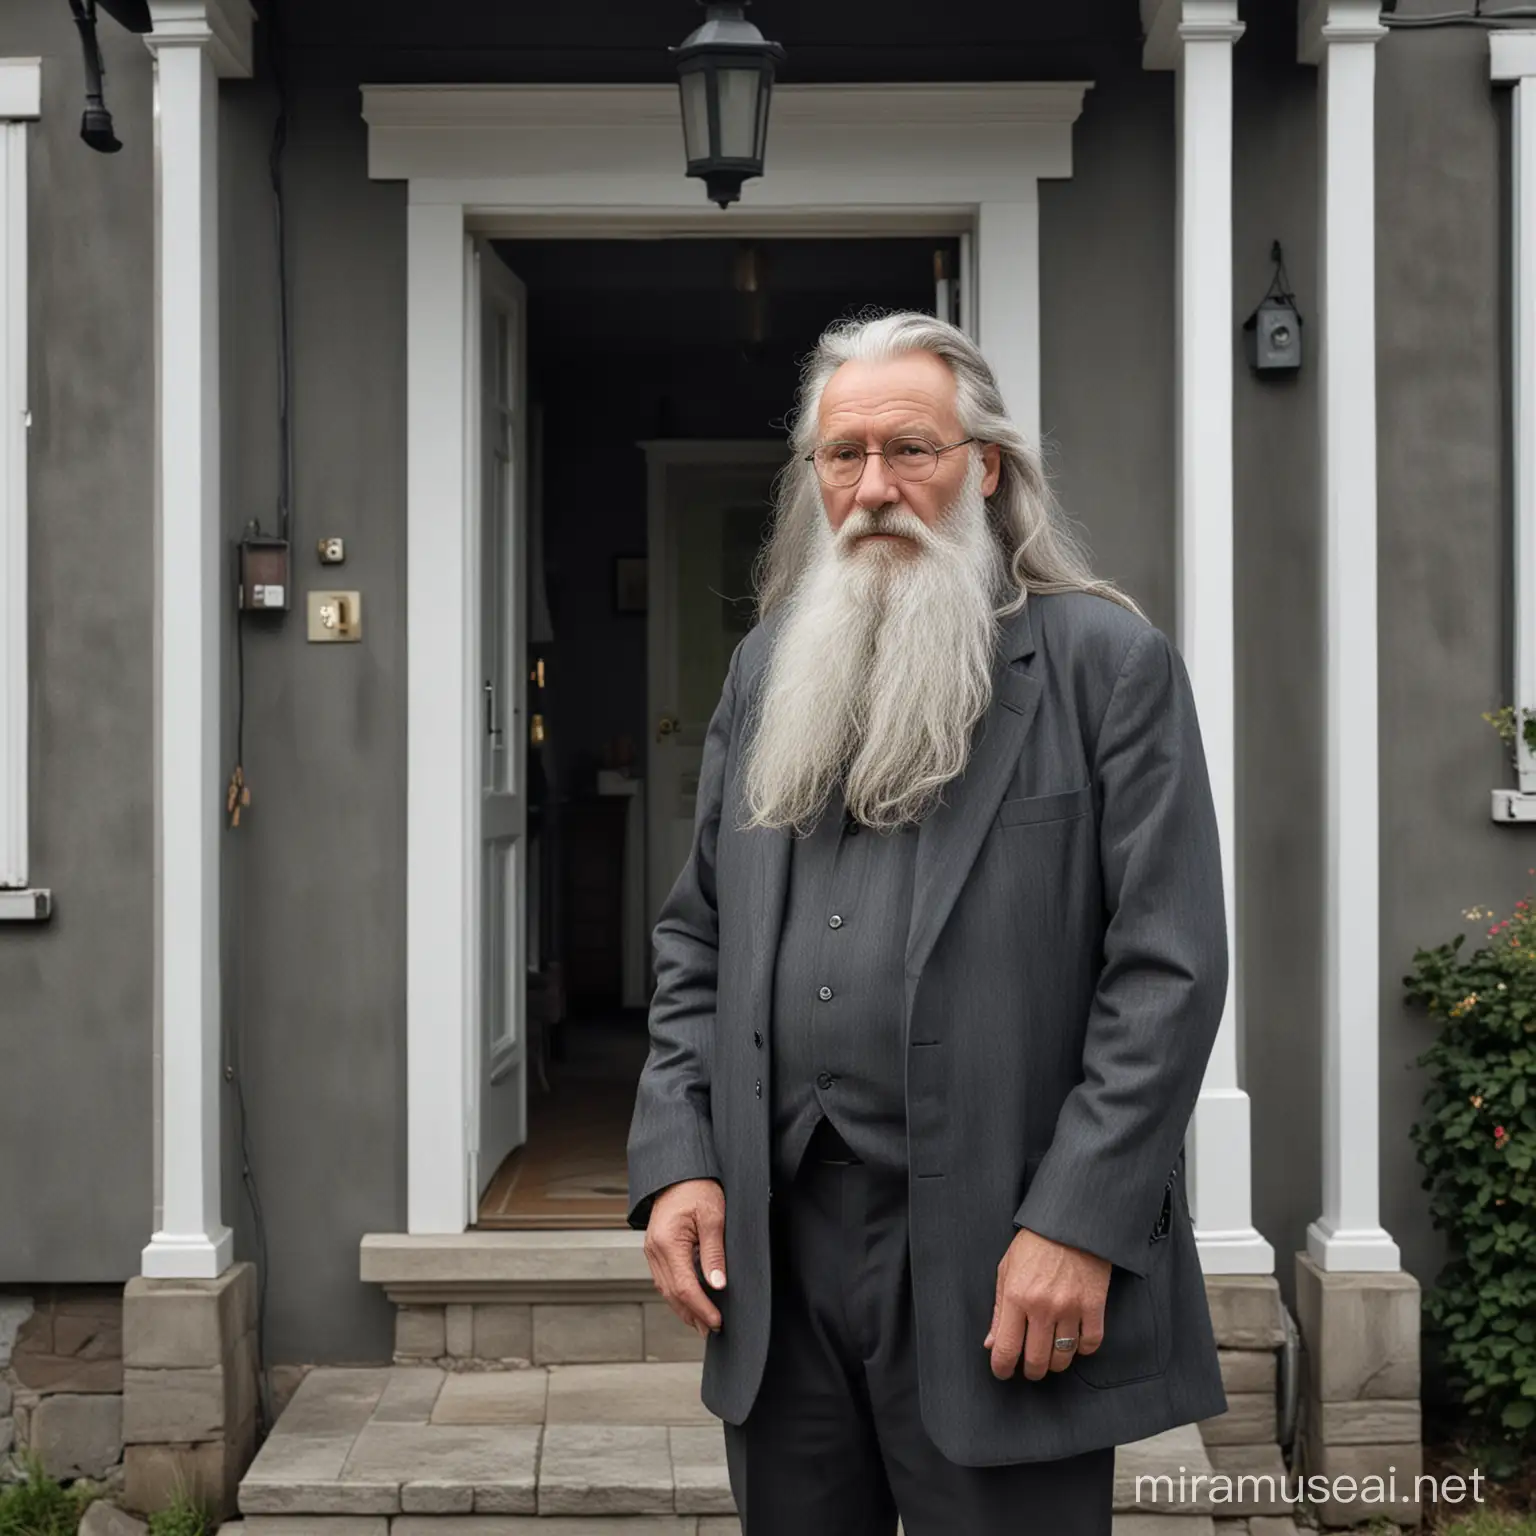 A photo-realistic picture of a 68-year-old Swedish philosopher,he has a long gray beard and long gray hair, he is outside in front of his detached house